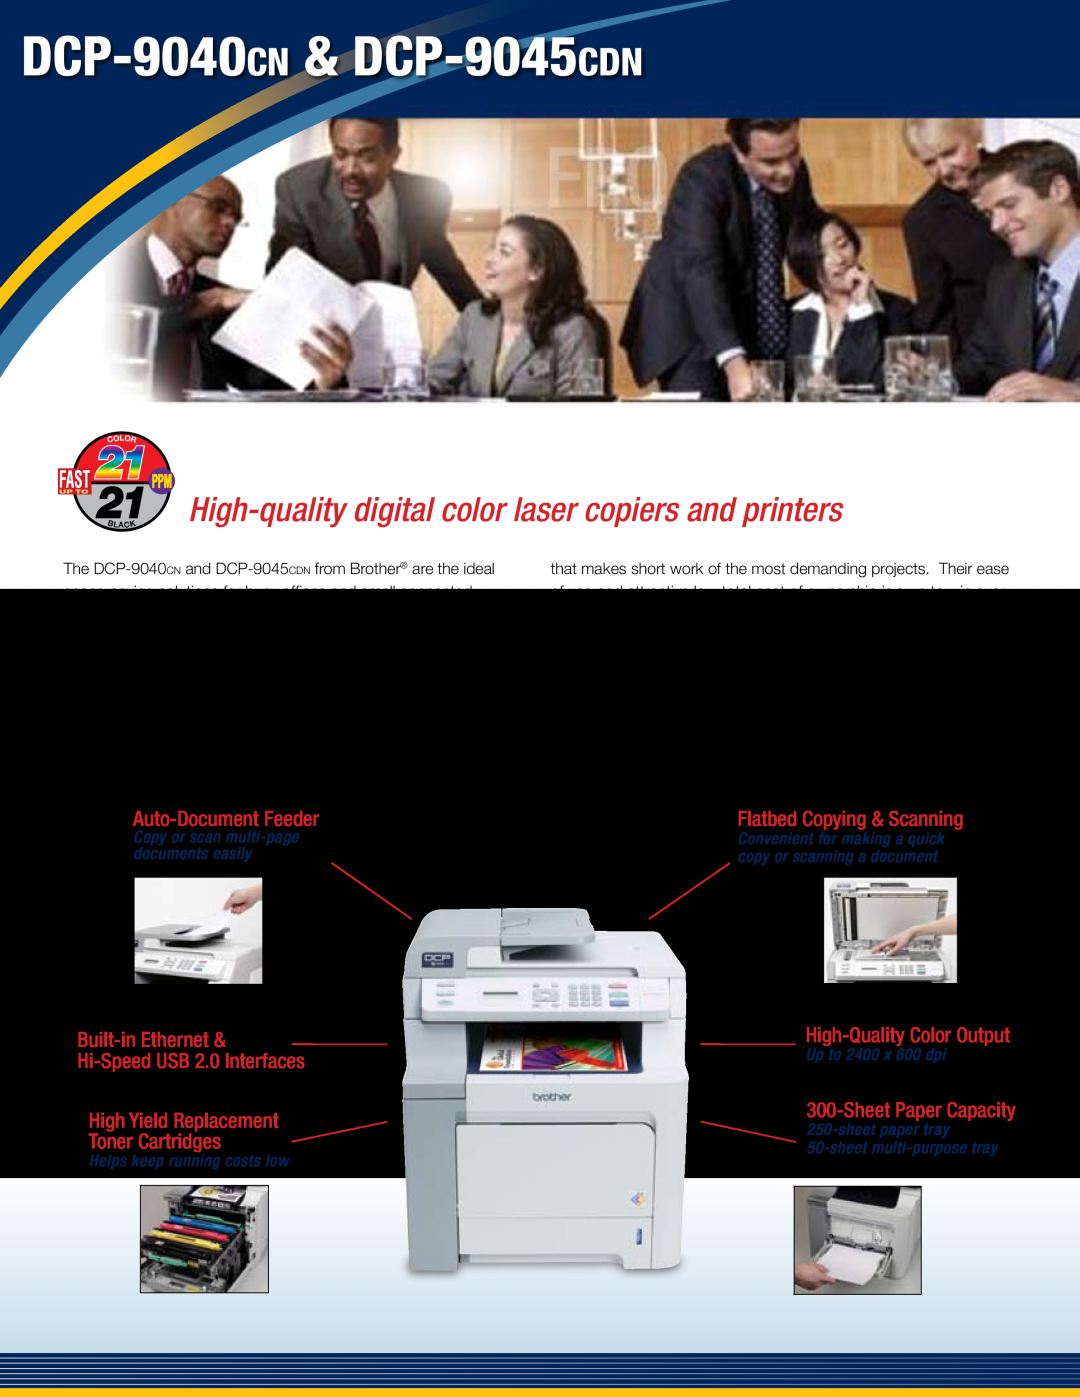 Brother DCP9040CN DCP-9040cn & DCP-9045cdn, High-quality digital color laser copiers and printers, Auto-Document Feeder 